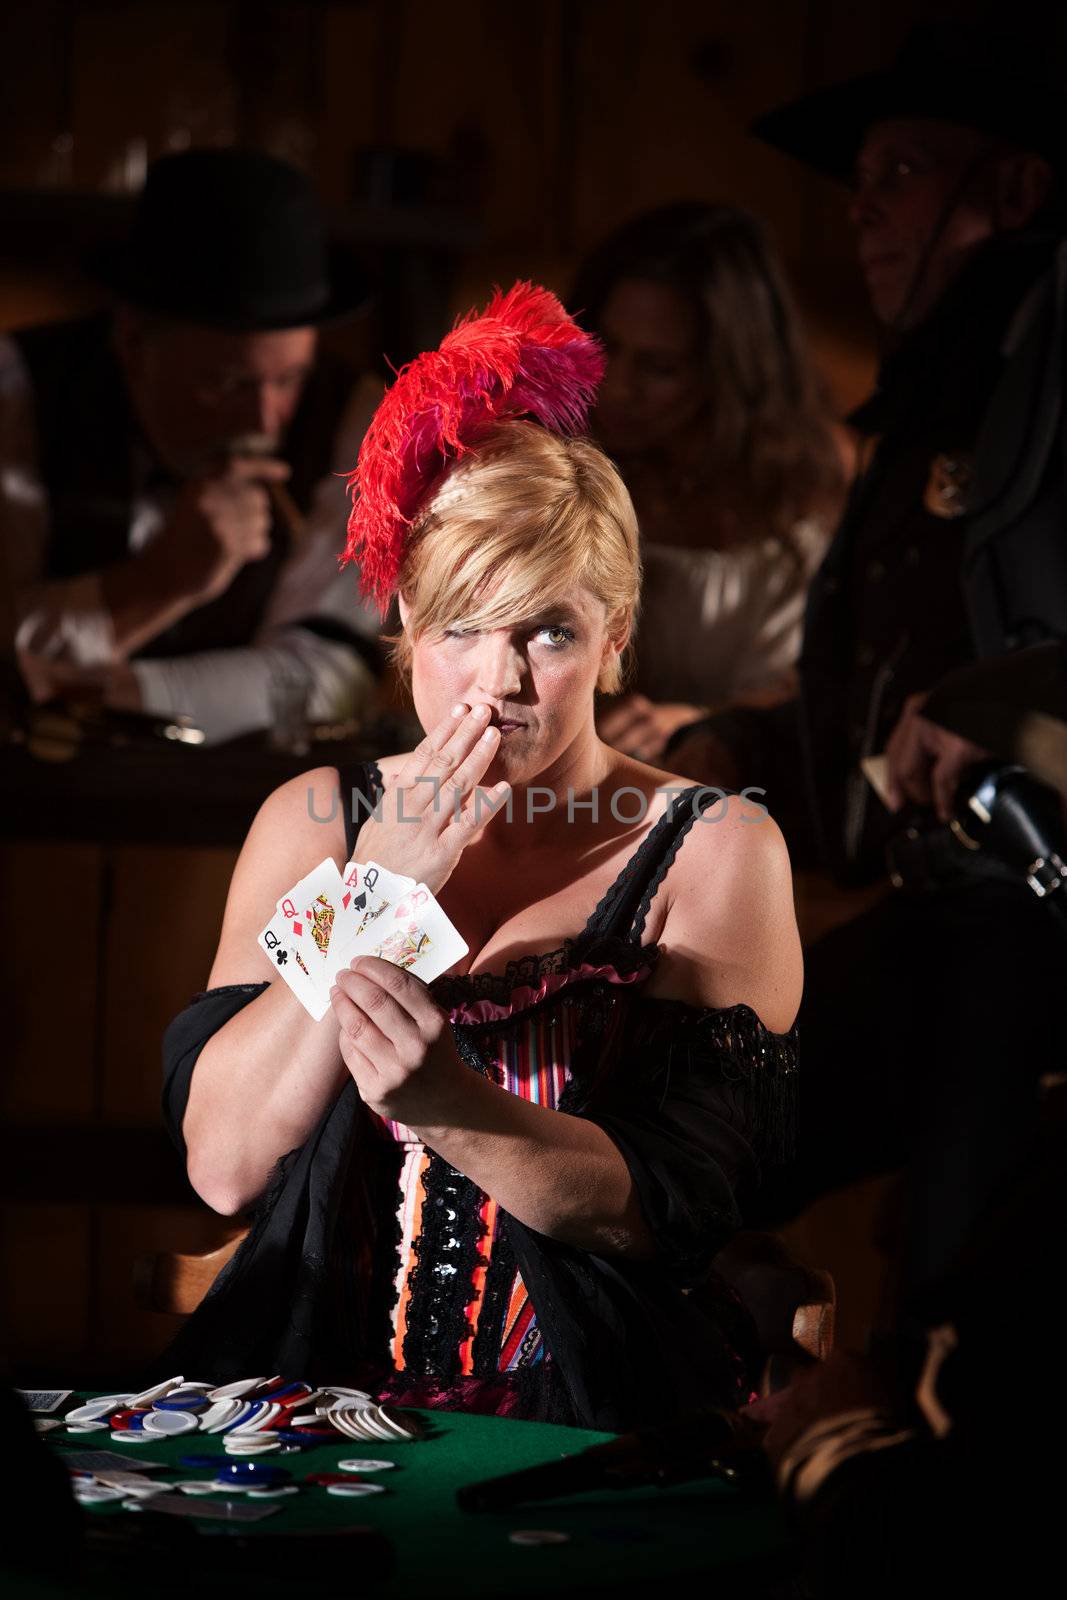 Pretty showgirl with hand over mouth and playing cards
